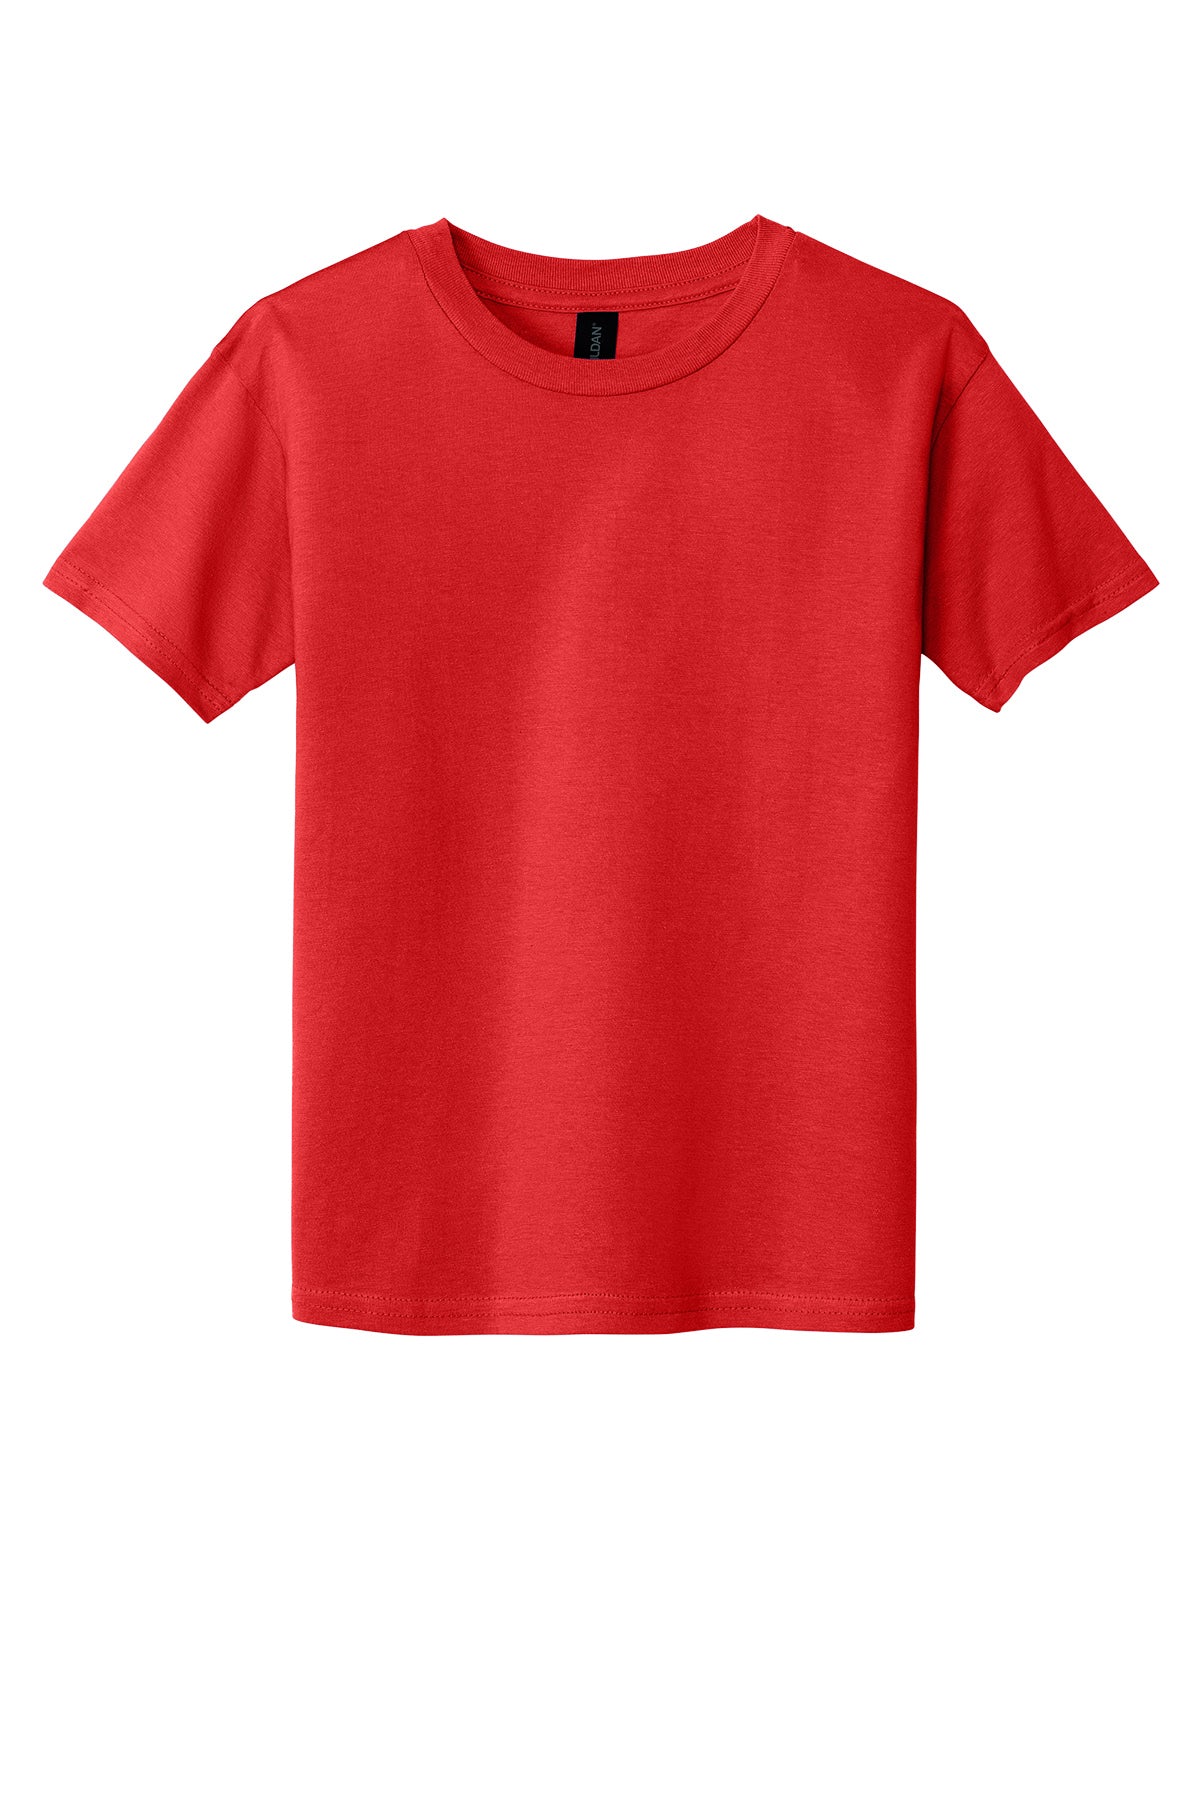 Gilden 64000B Youth T-Shirt Yth Small / Red